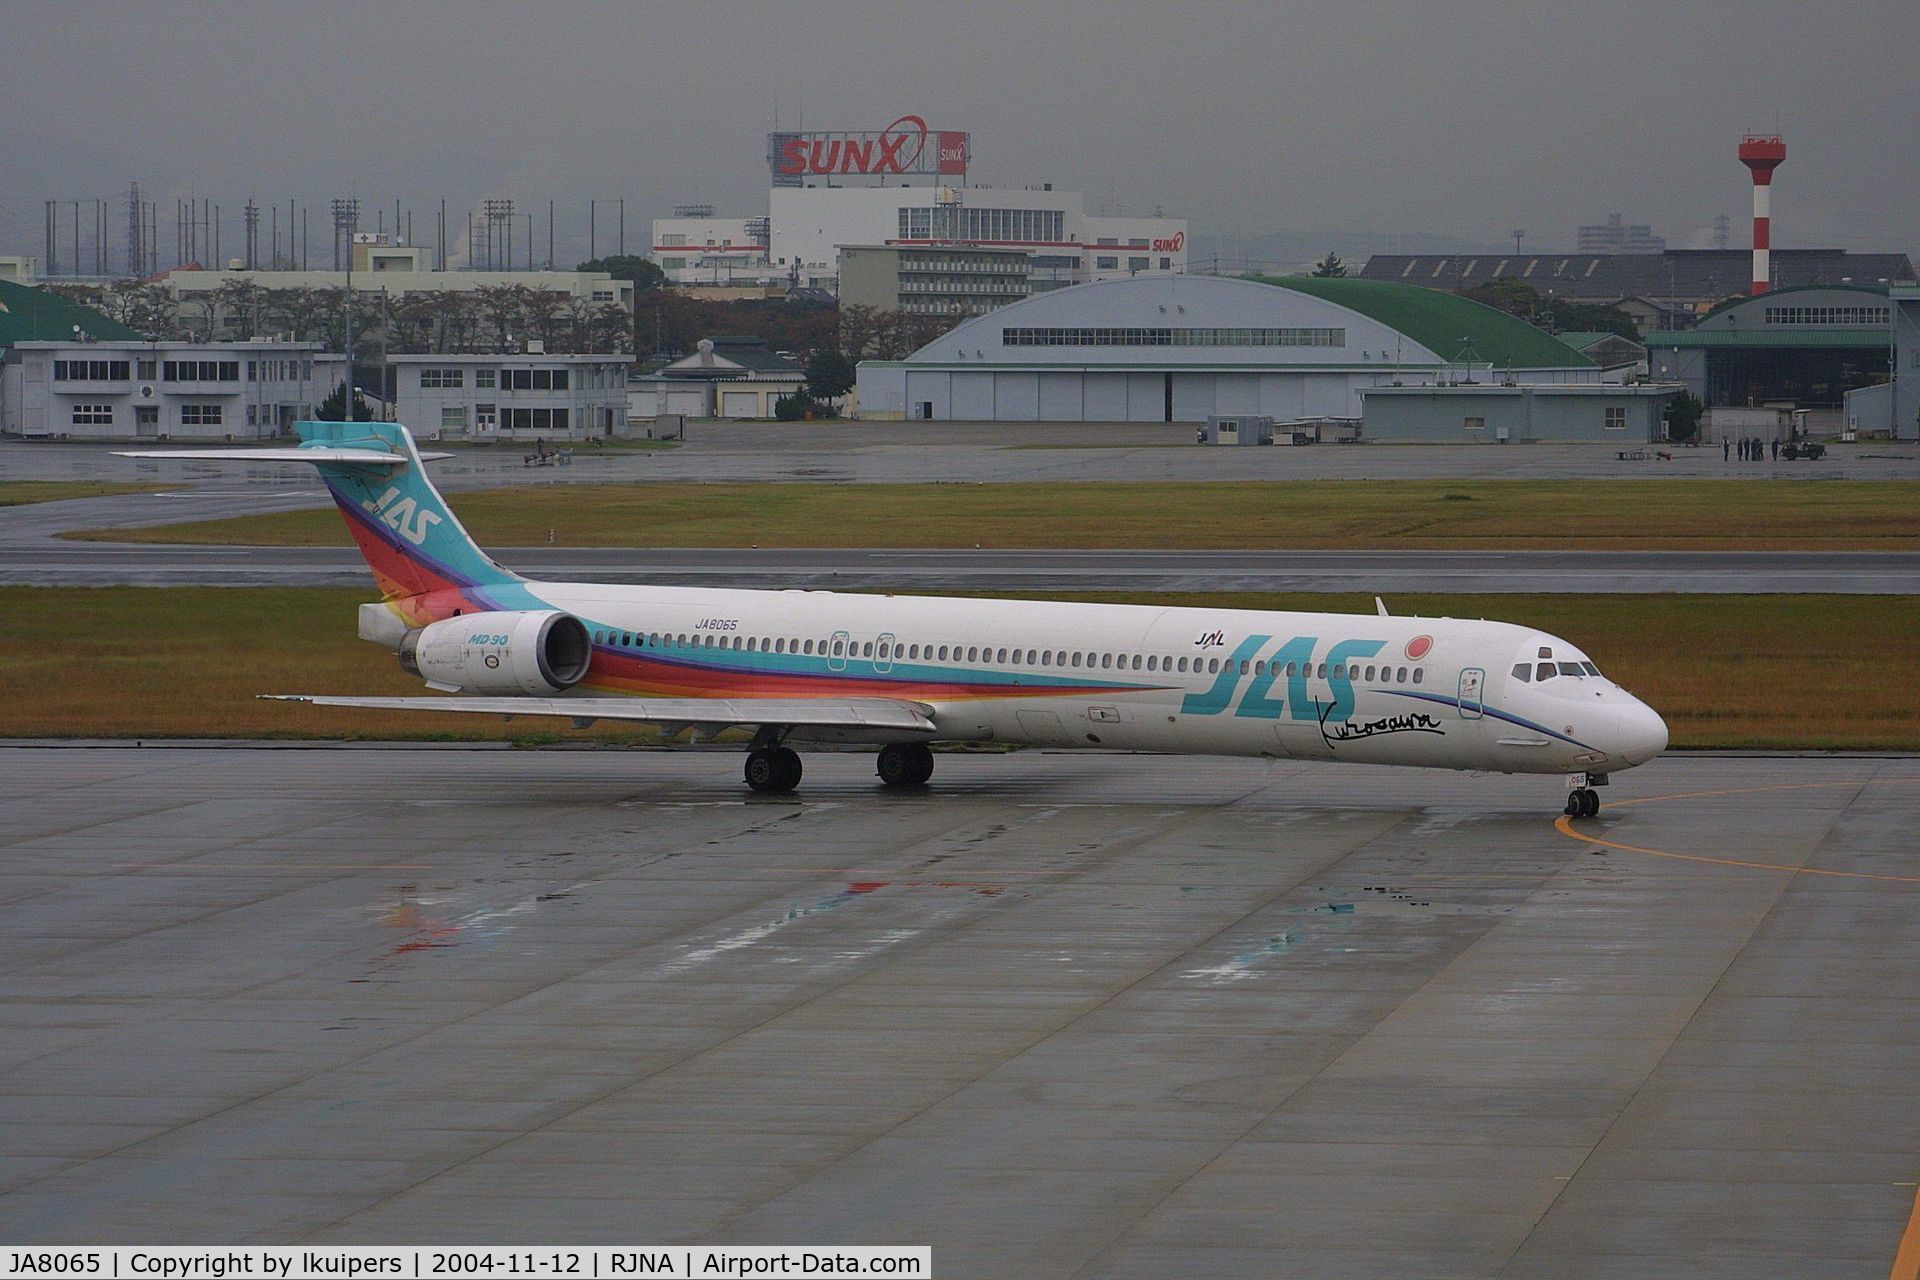 JA8065, 1996 McDonnell Douglas MD-90-30 C/N 53355, This MD-90 was painted in the livery of JAS